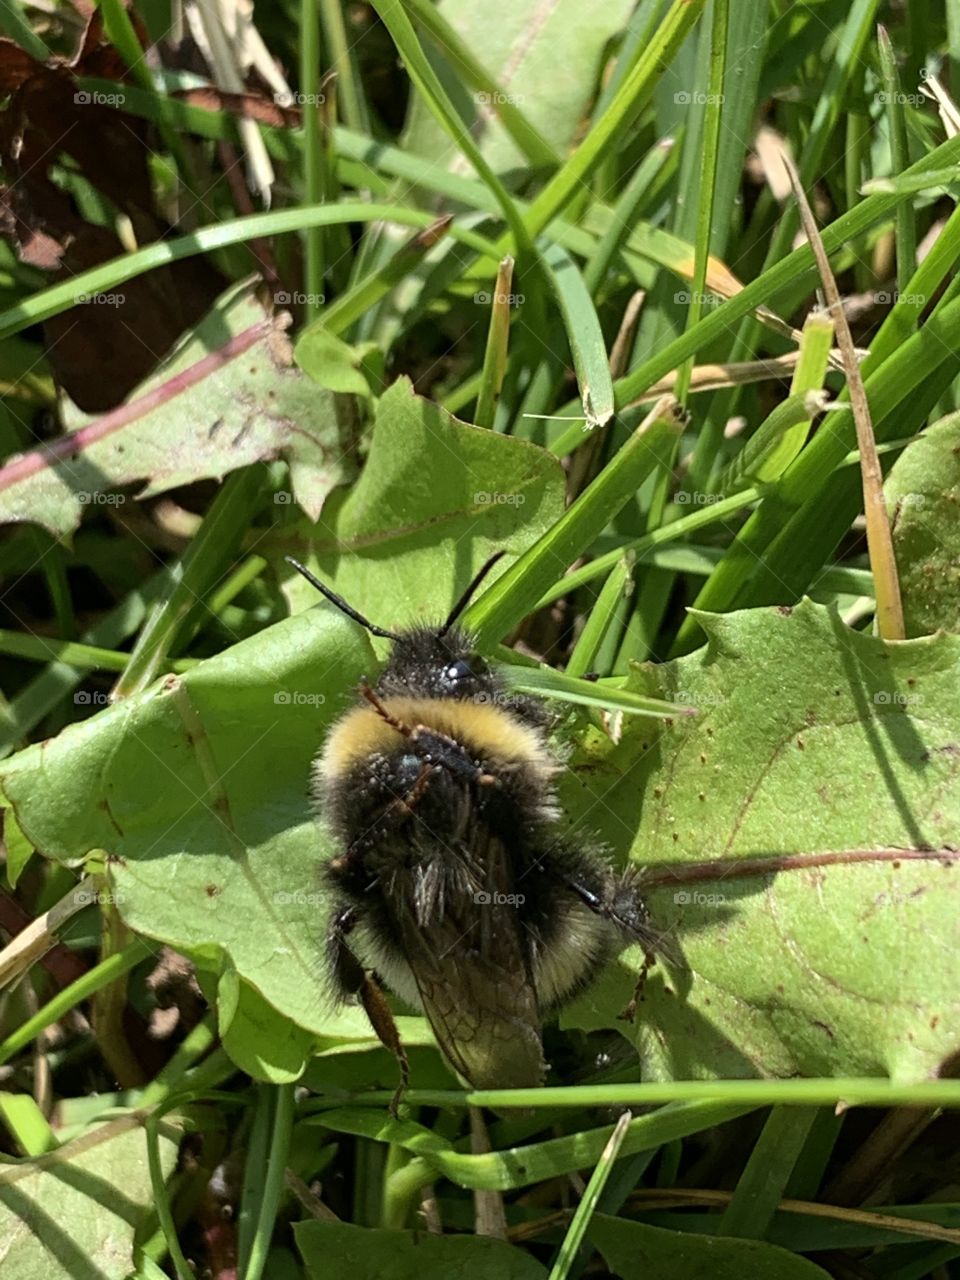 Bee in the grass 